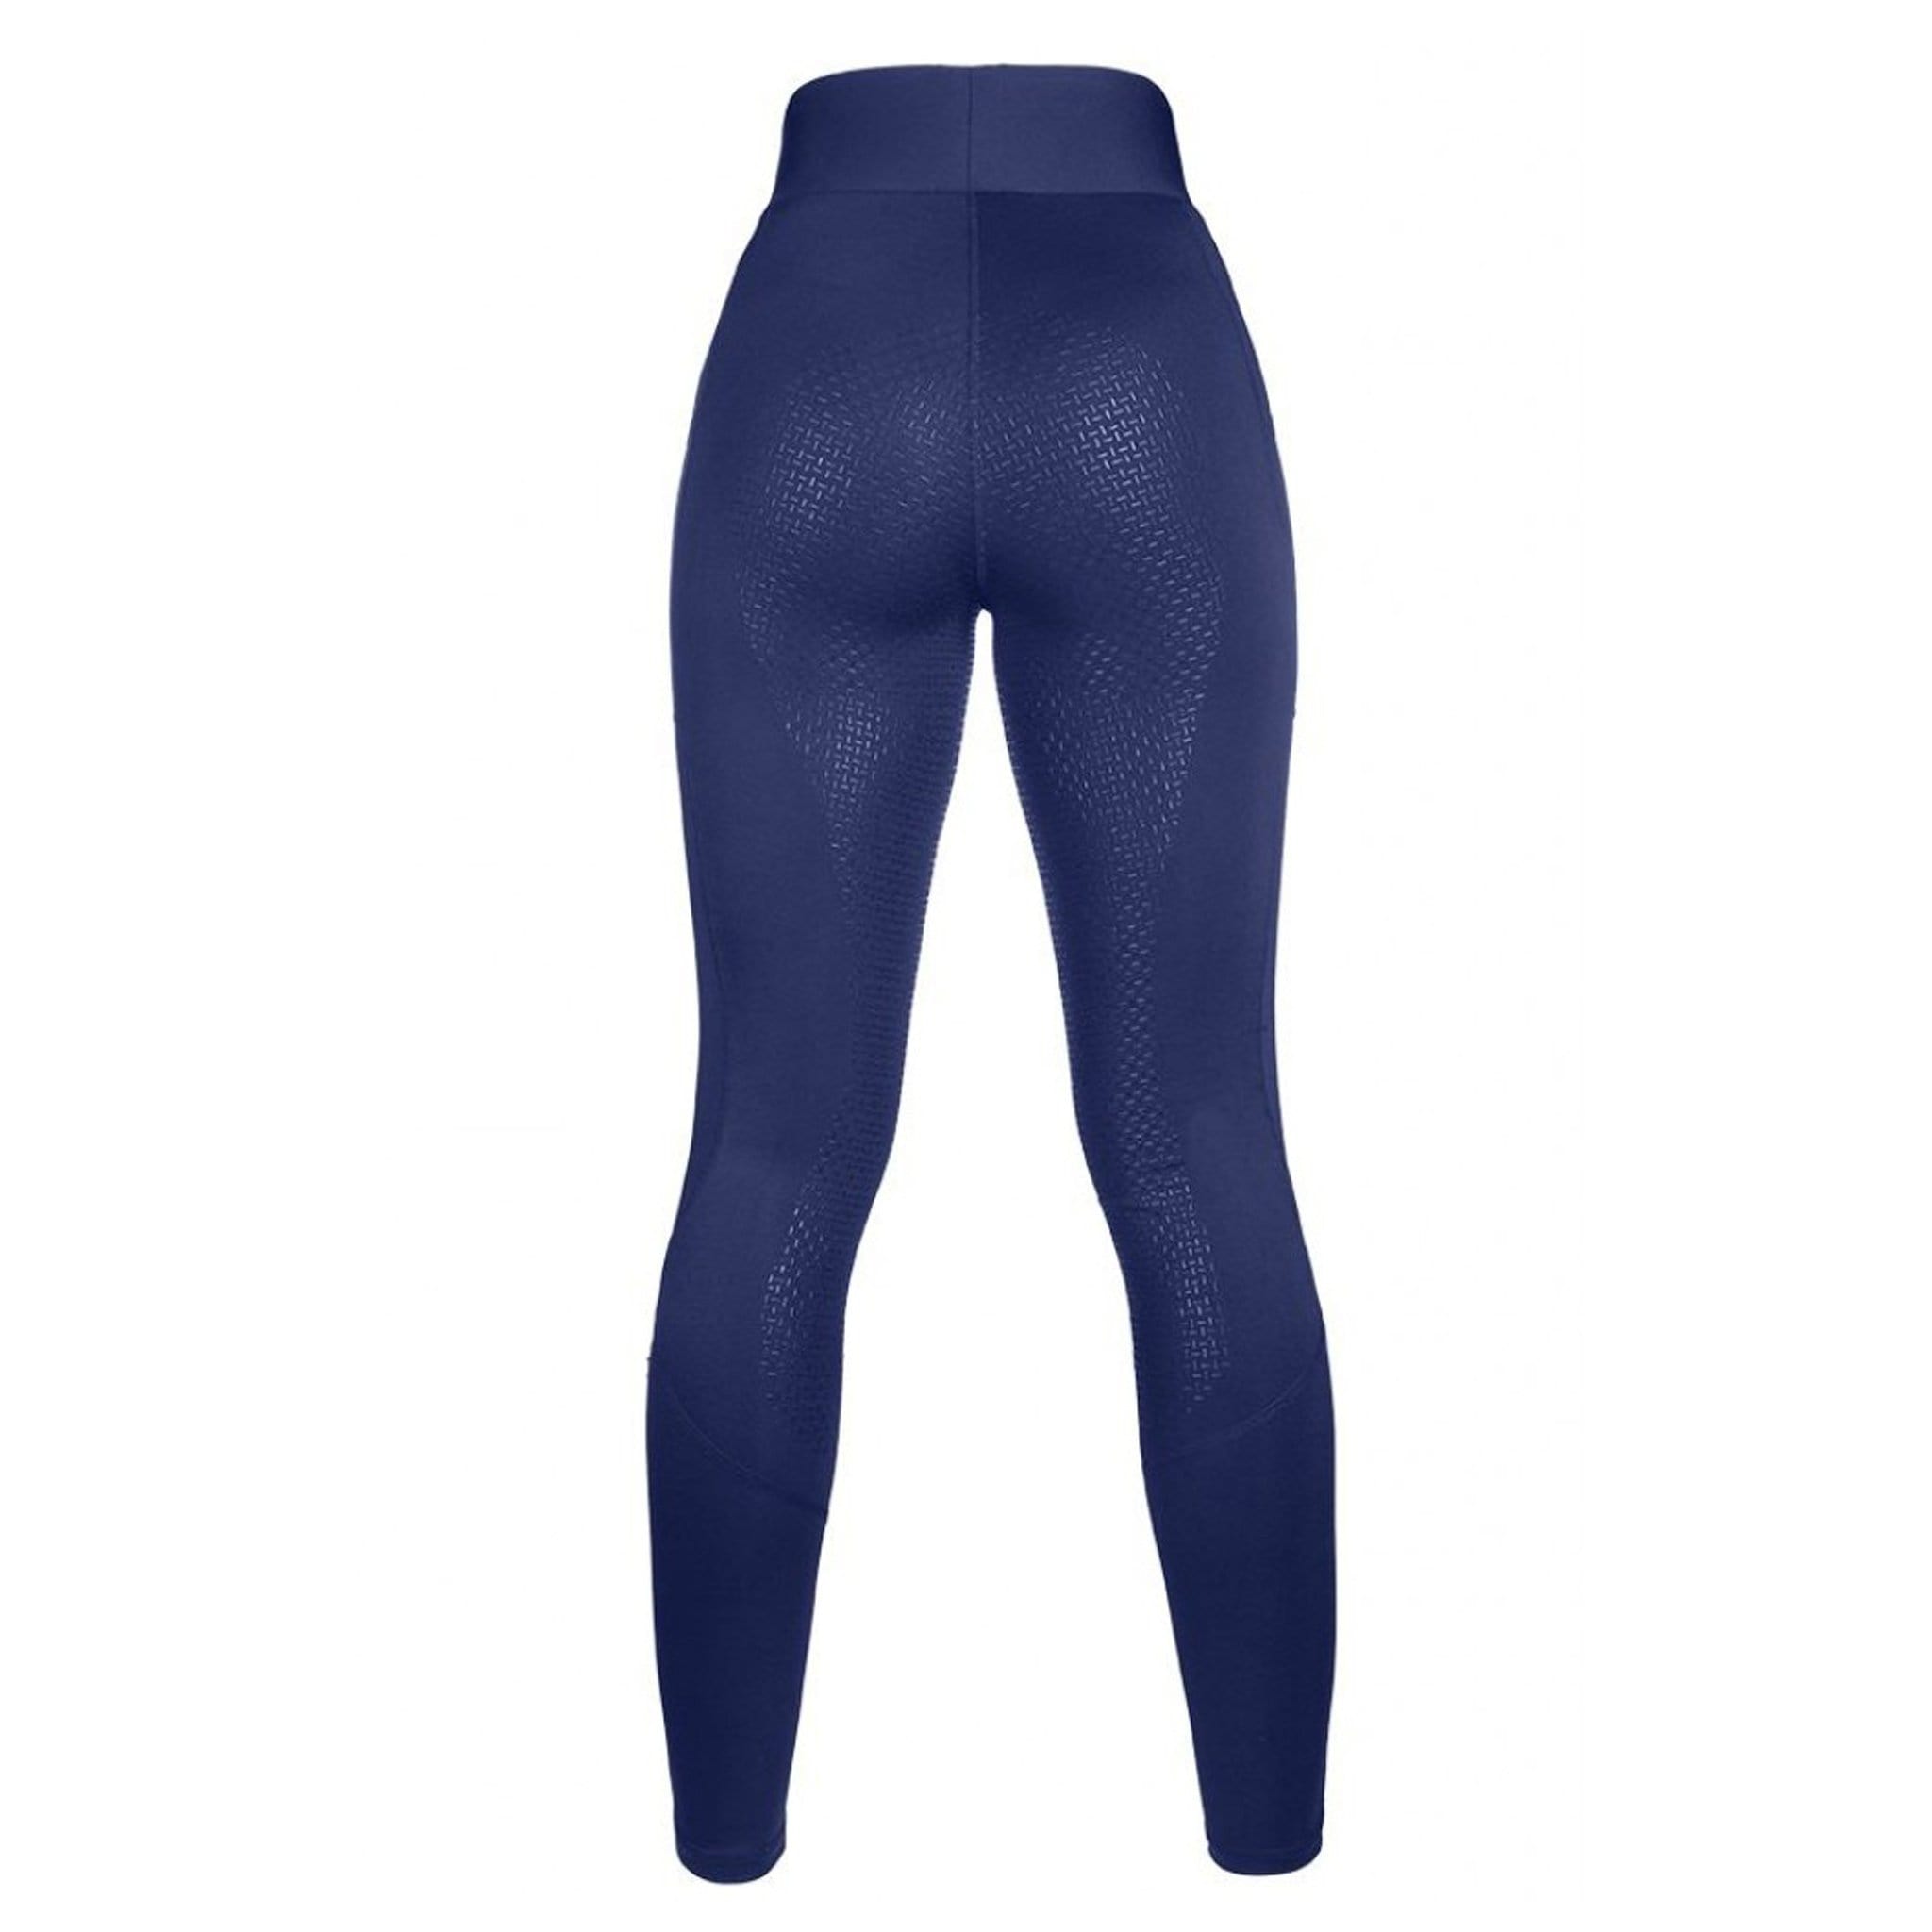 HKM Style Silicone Full Seat Riding Tights 12277 Dark Blue Rear View